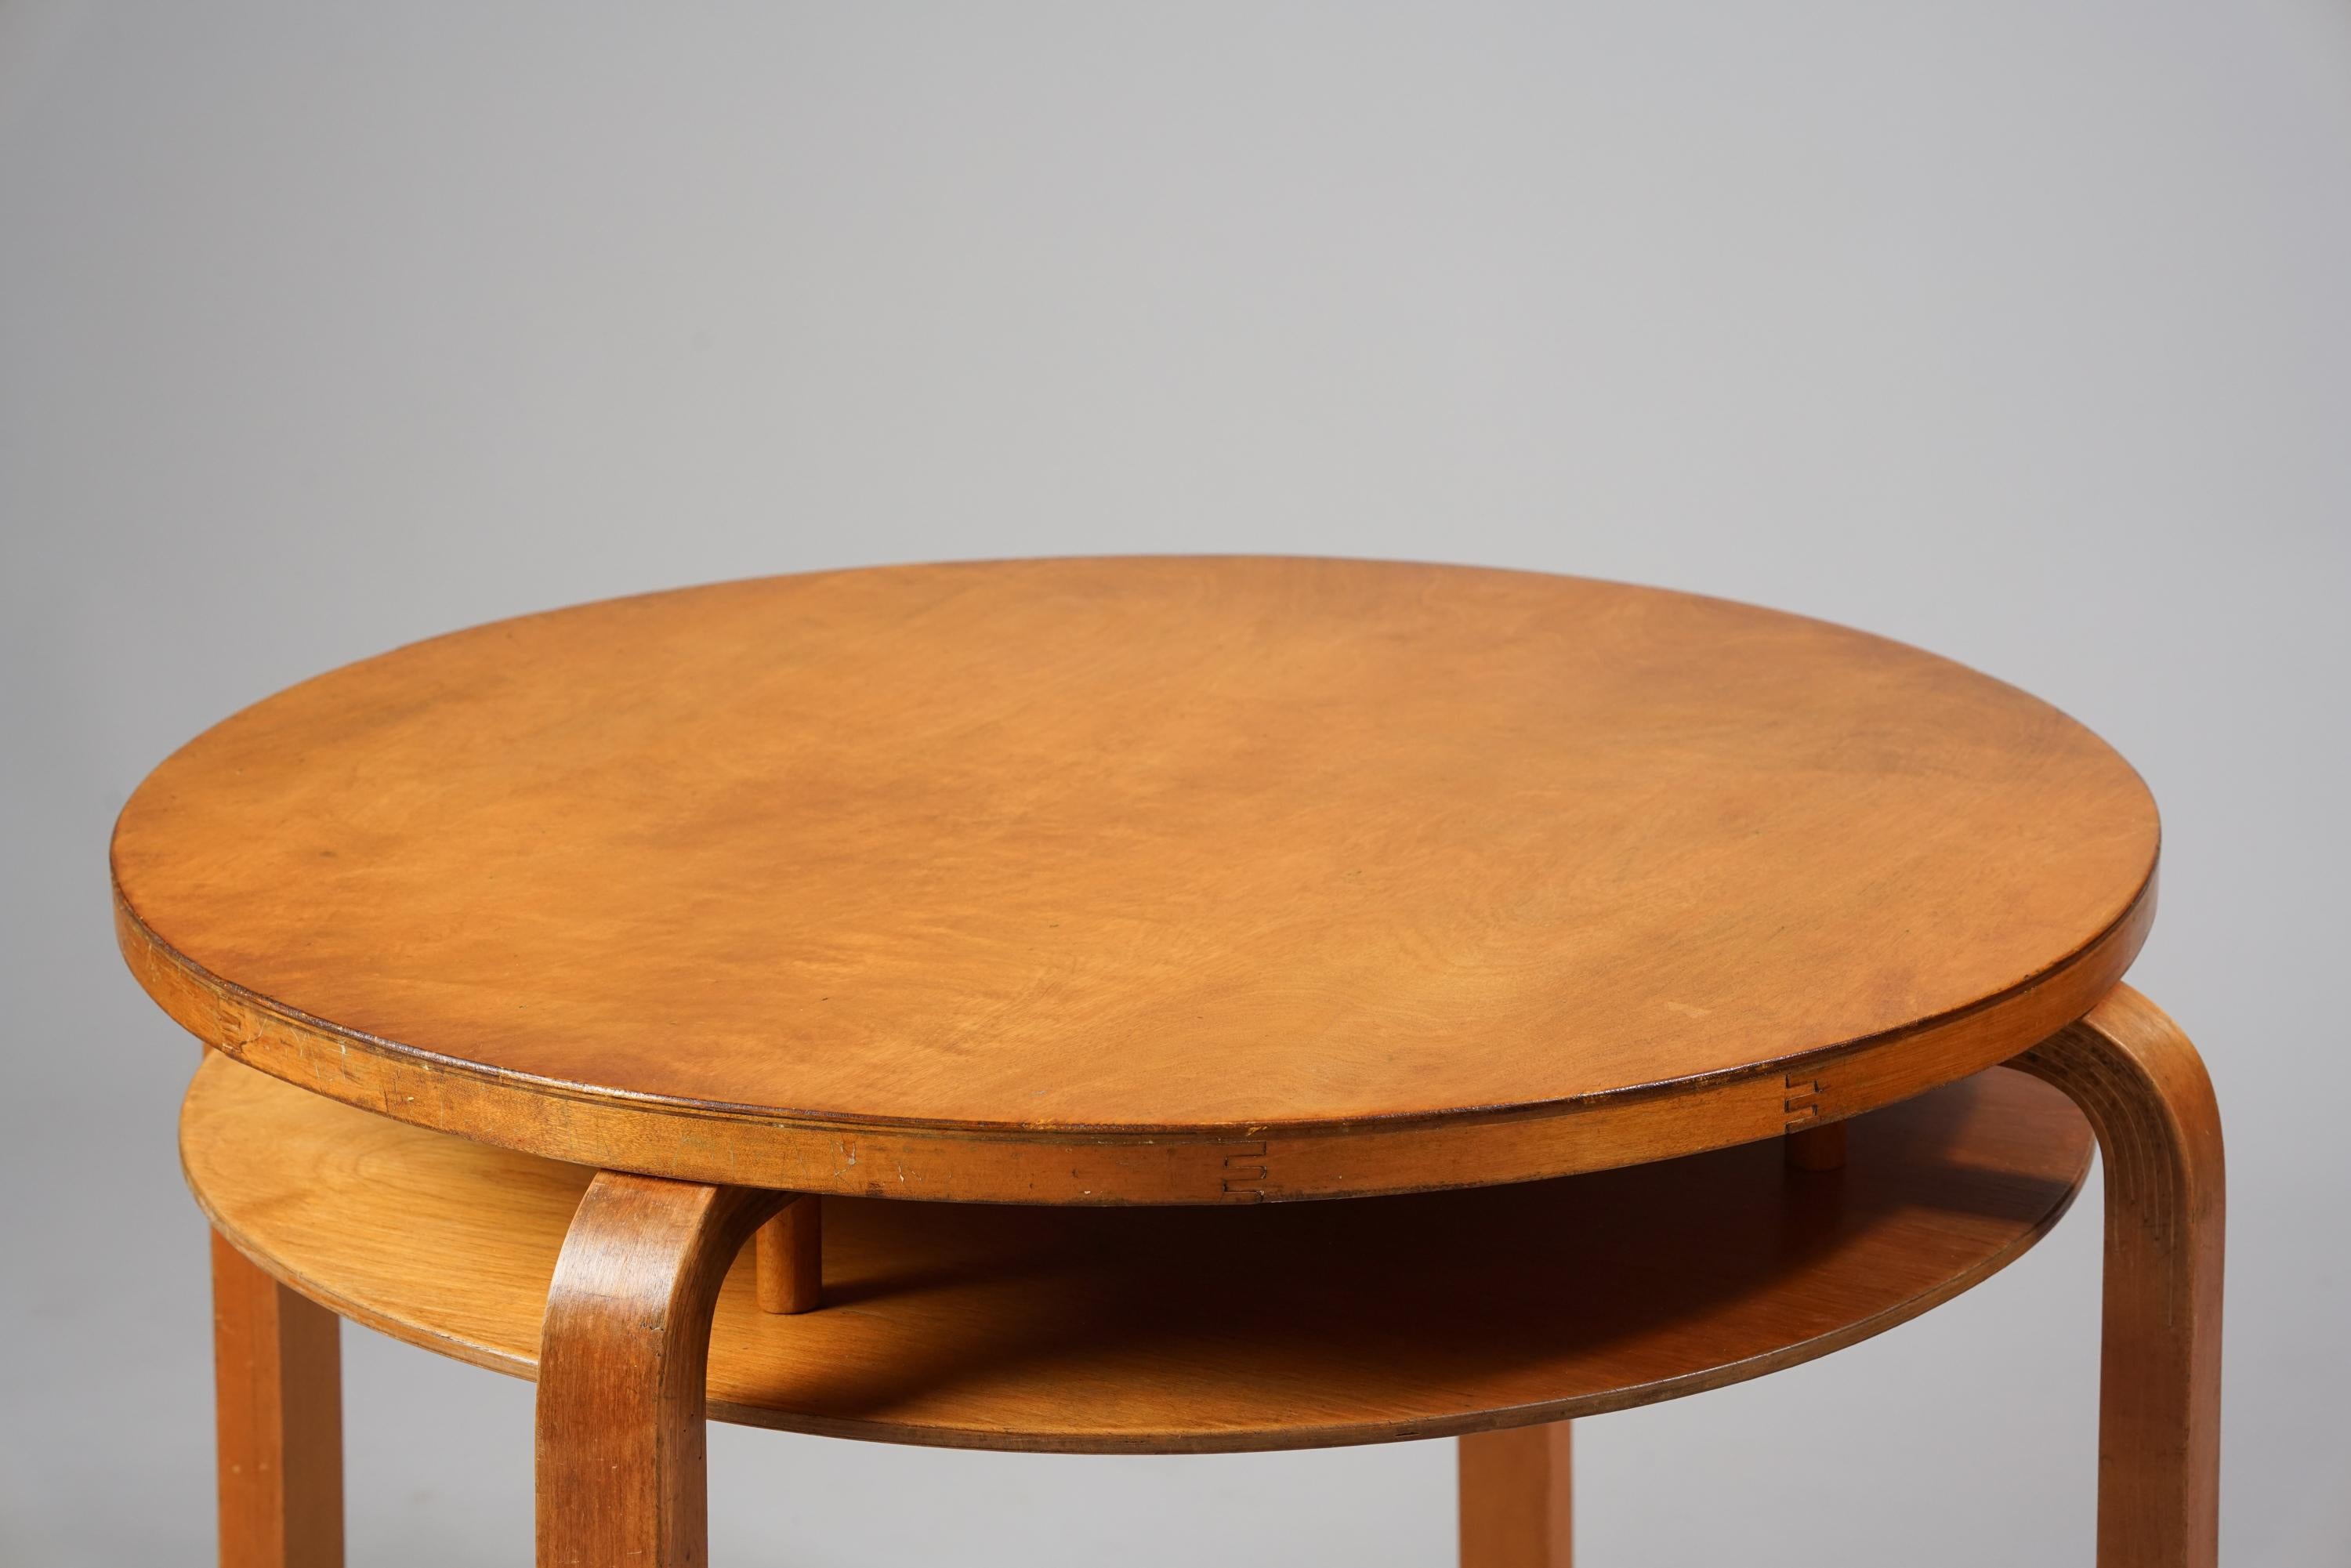 Coffee table, designed by Alvar Aalto, manufactured by Oy Huonekalu- ja Rakennustyötehdas Ab, 1930s, birch. Good vintage condition, patina consistent with age and use. 

Alvar Aalto (1898-1976) is probably the most famous Finnish architect and